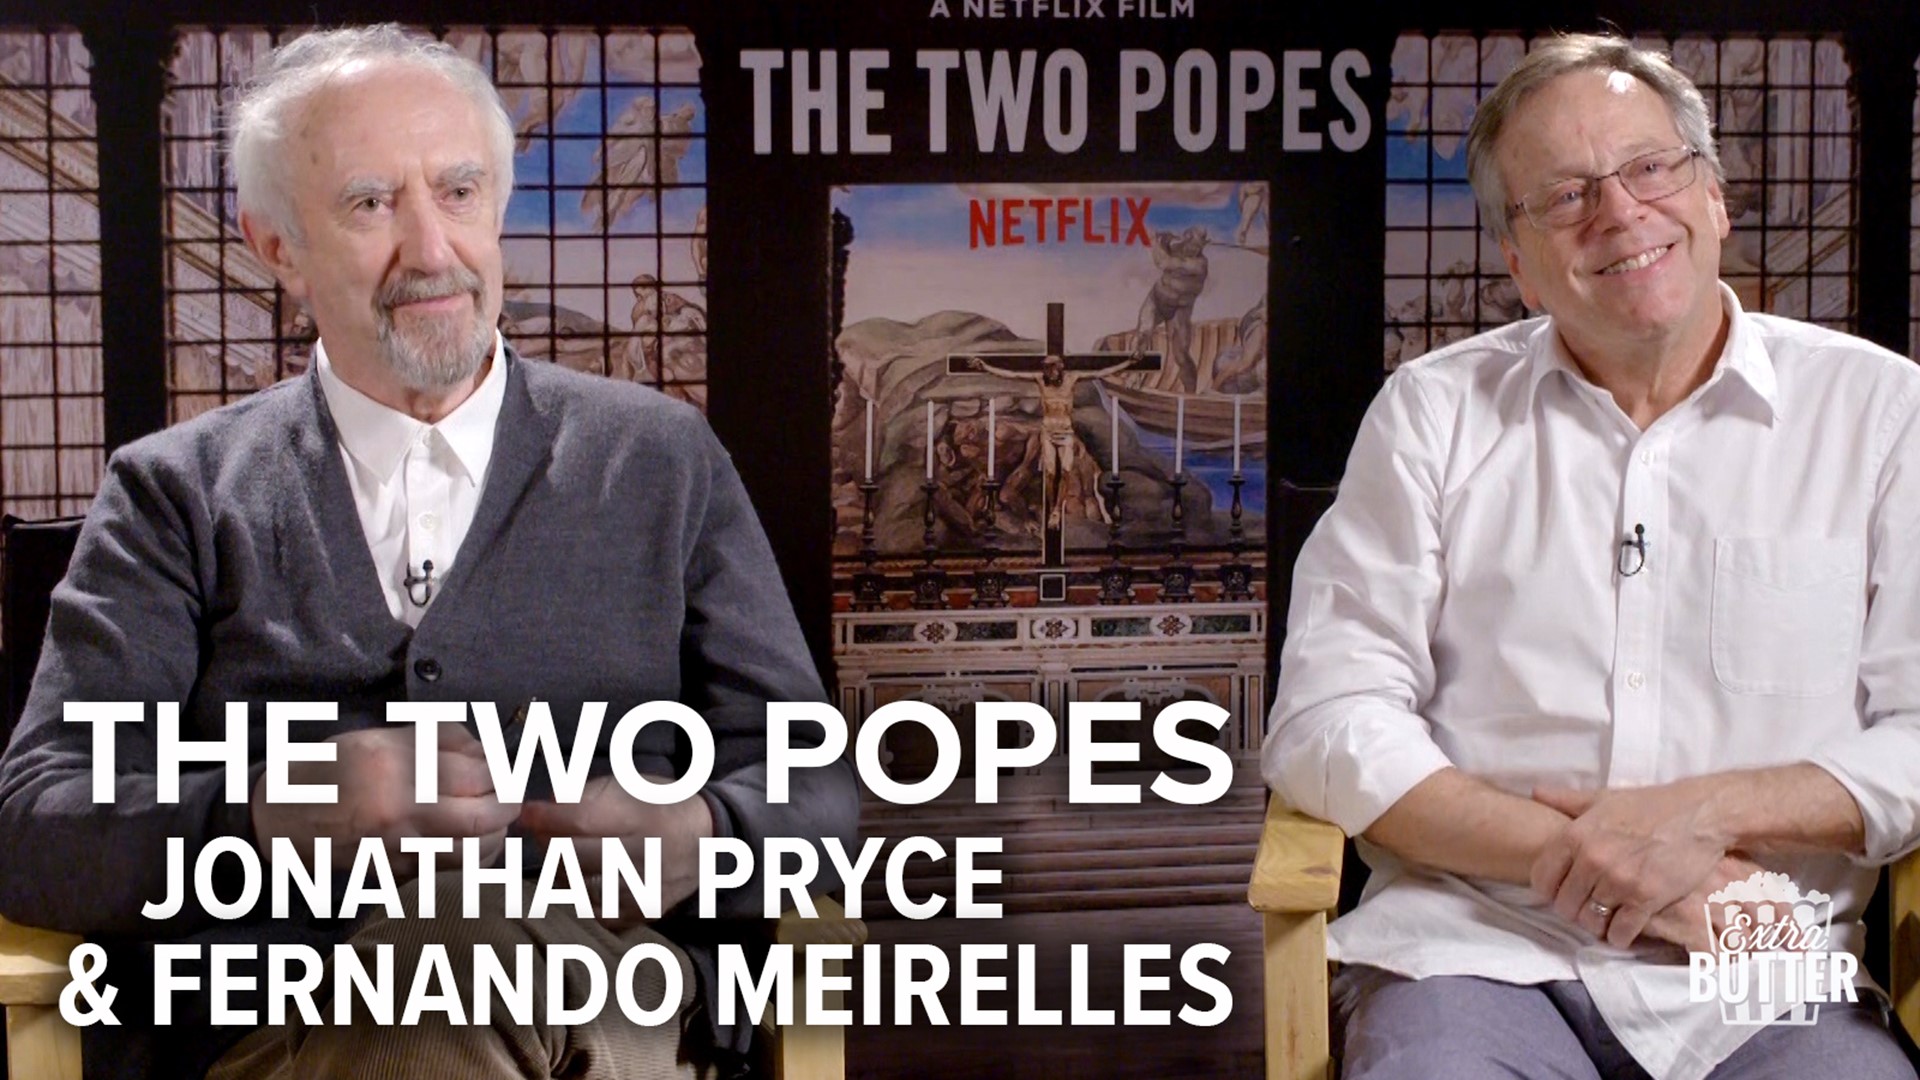 Jonathan Pryce and Fernando Meirelles talk about making the Netflix movie 'The Two Popes.' Pryce stars as the future Pope Francis, while Meirelles directs the movie.